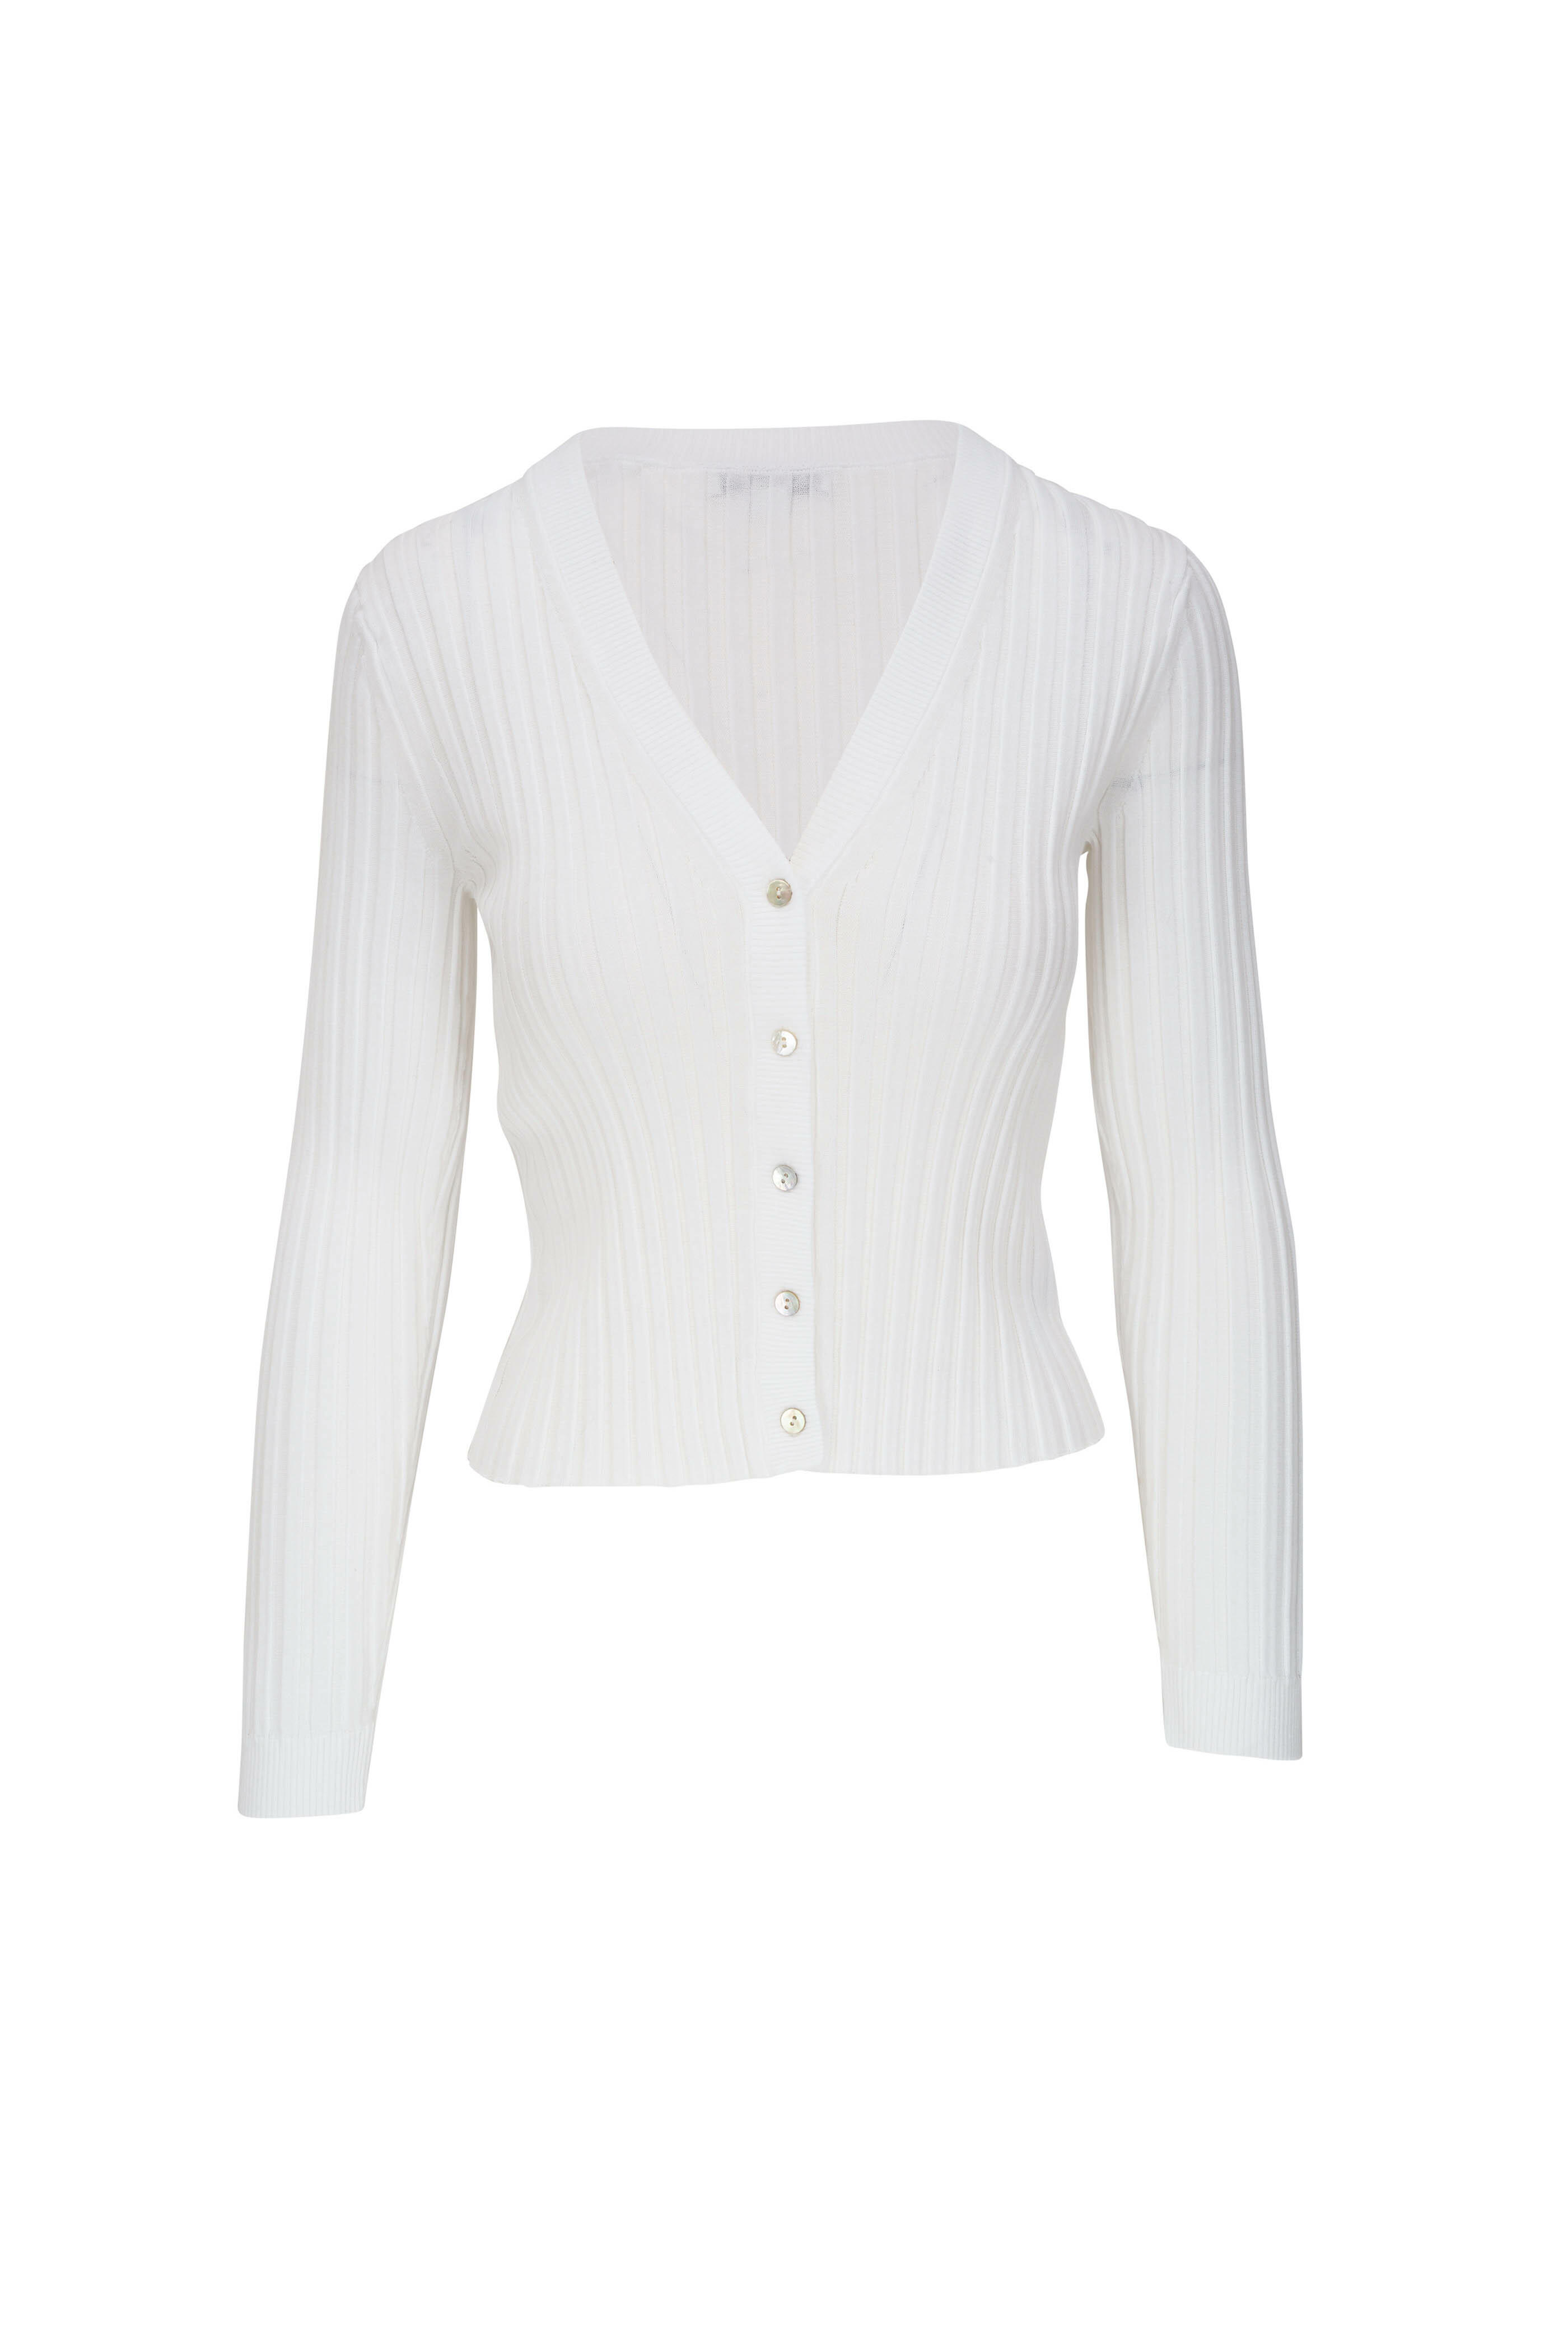 Vince - Optic White Ribbed V-Neck Cardigan | Mitchell Stores